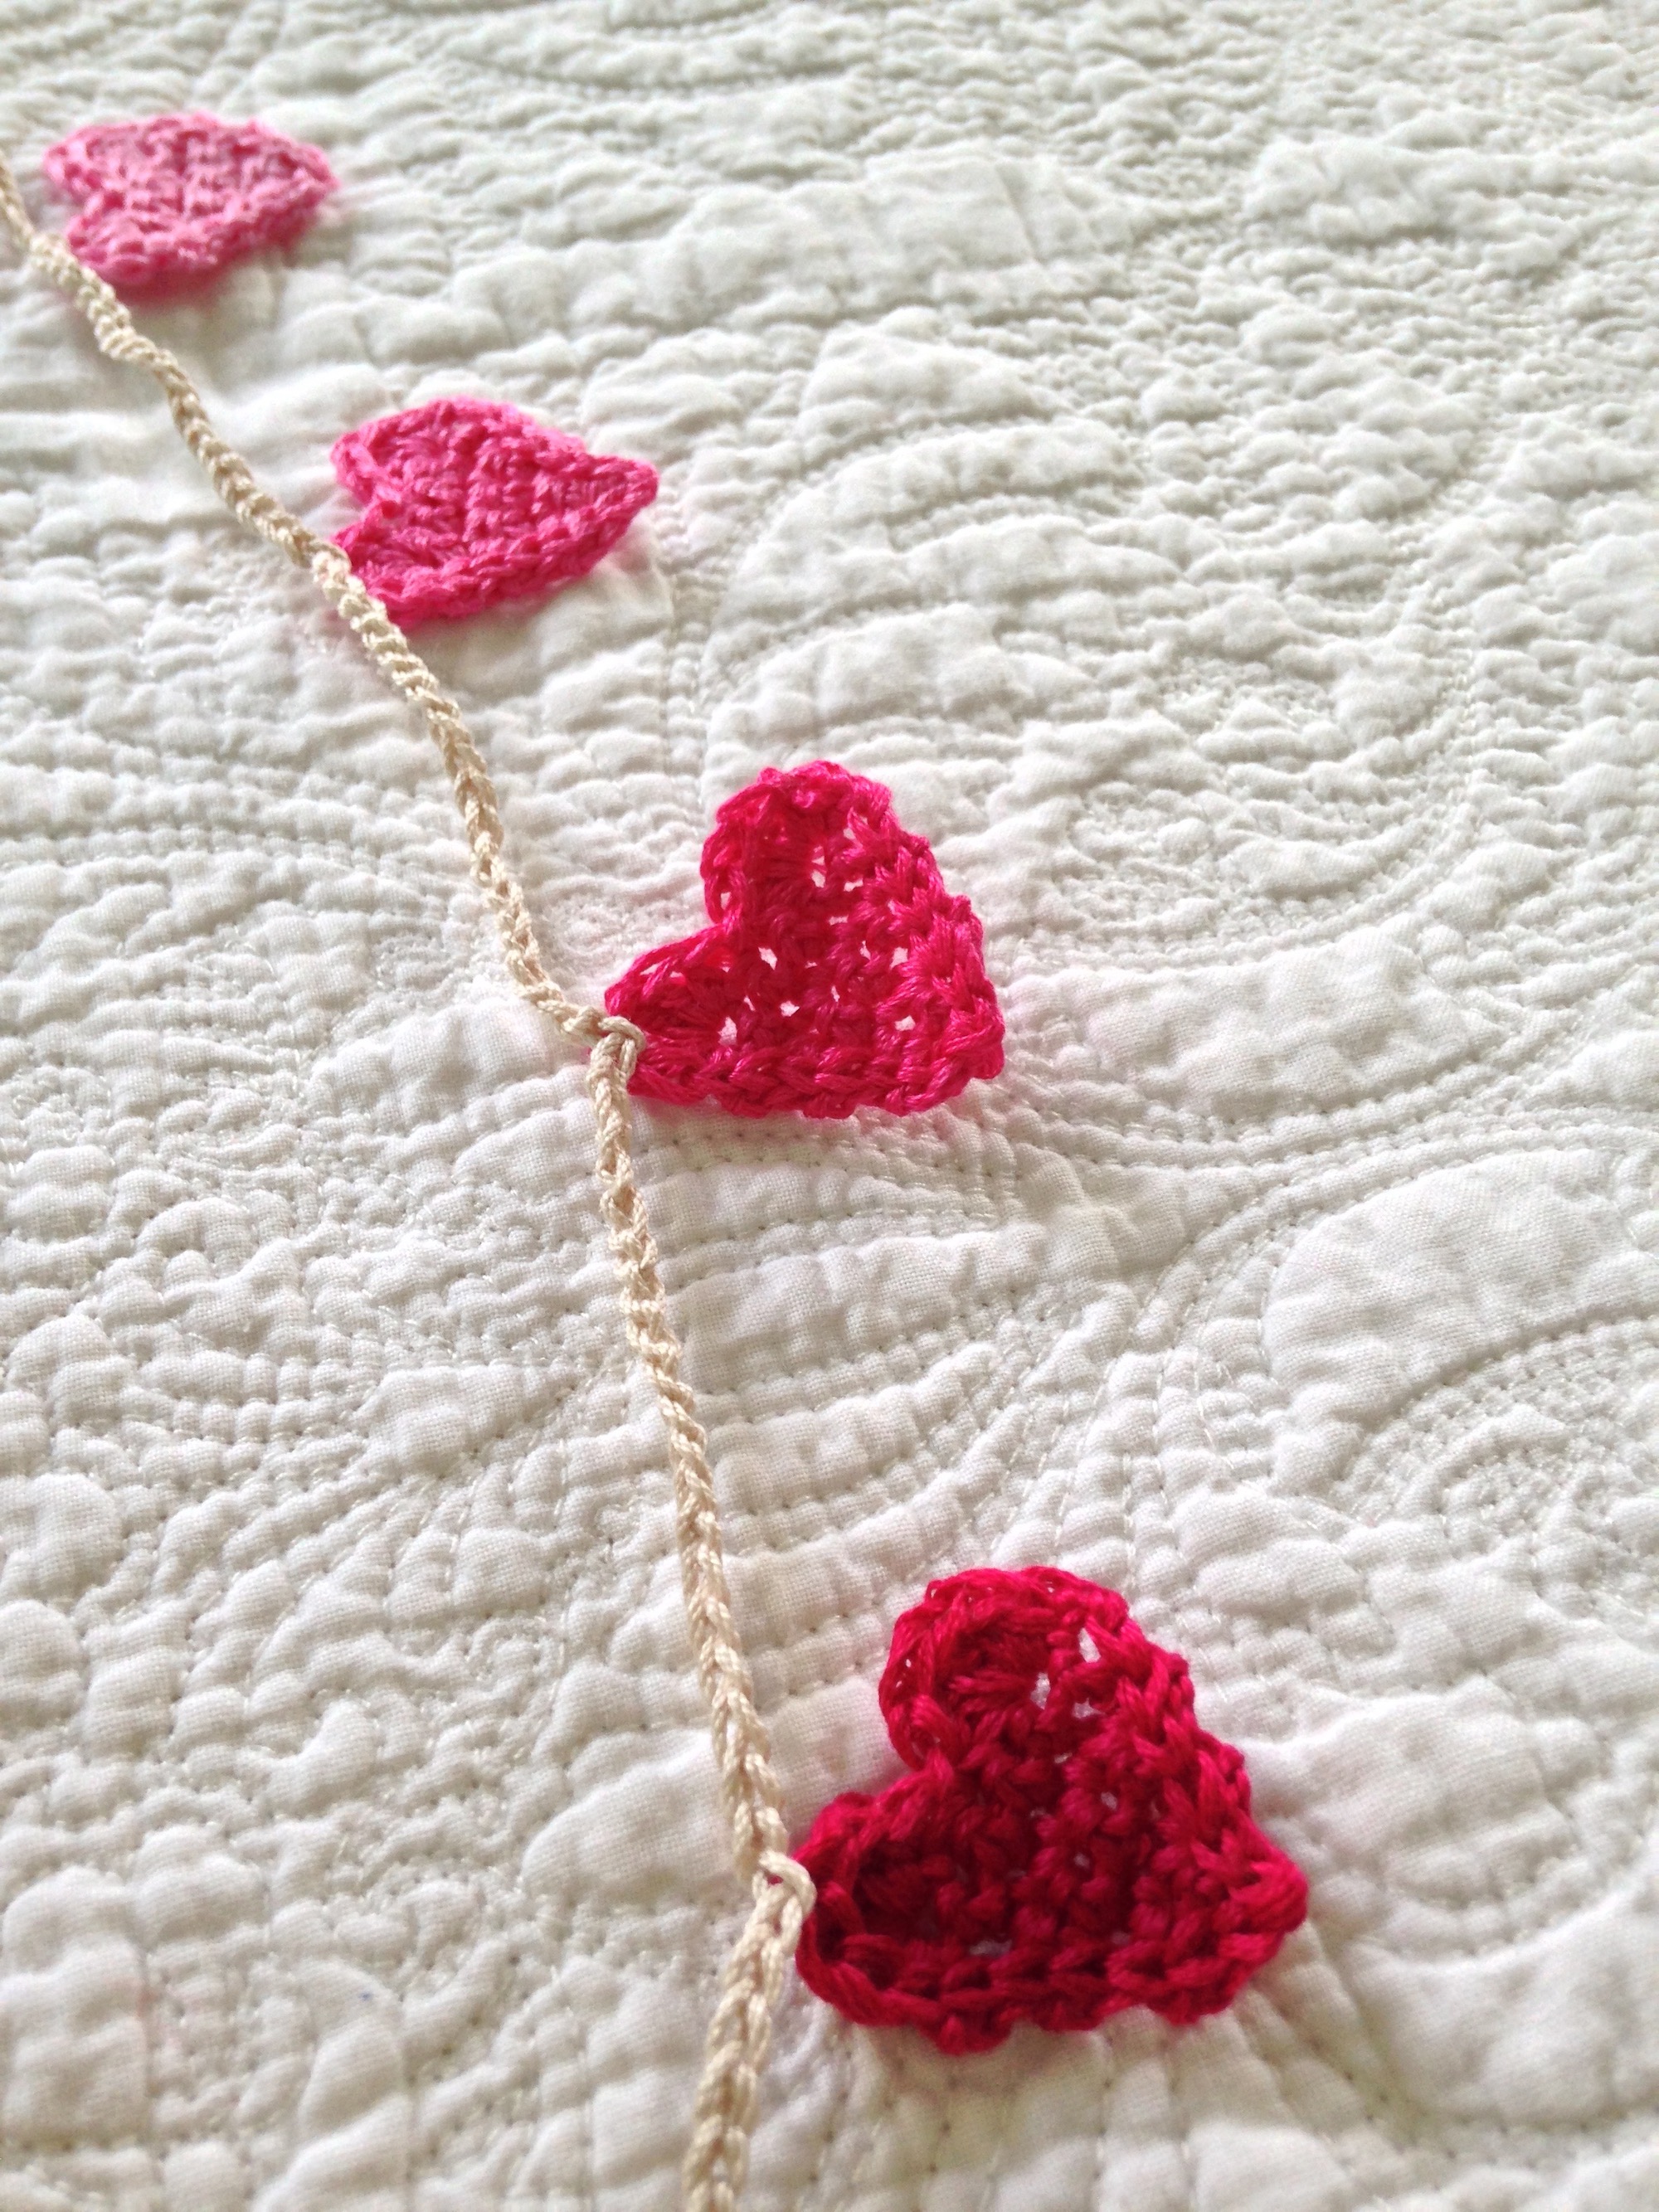 Tiny crocheted heart garland. A gradient of Dark red through to pink.